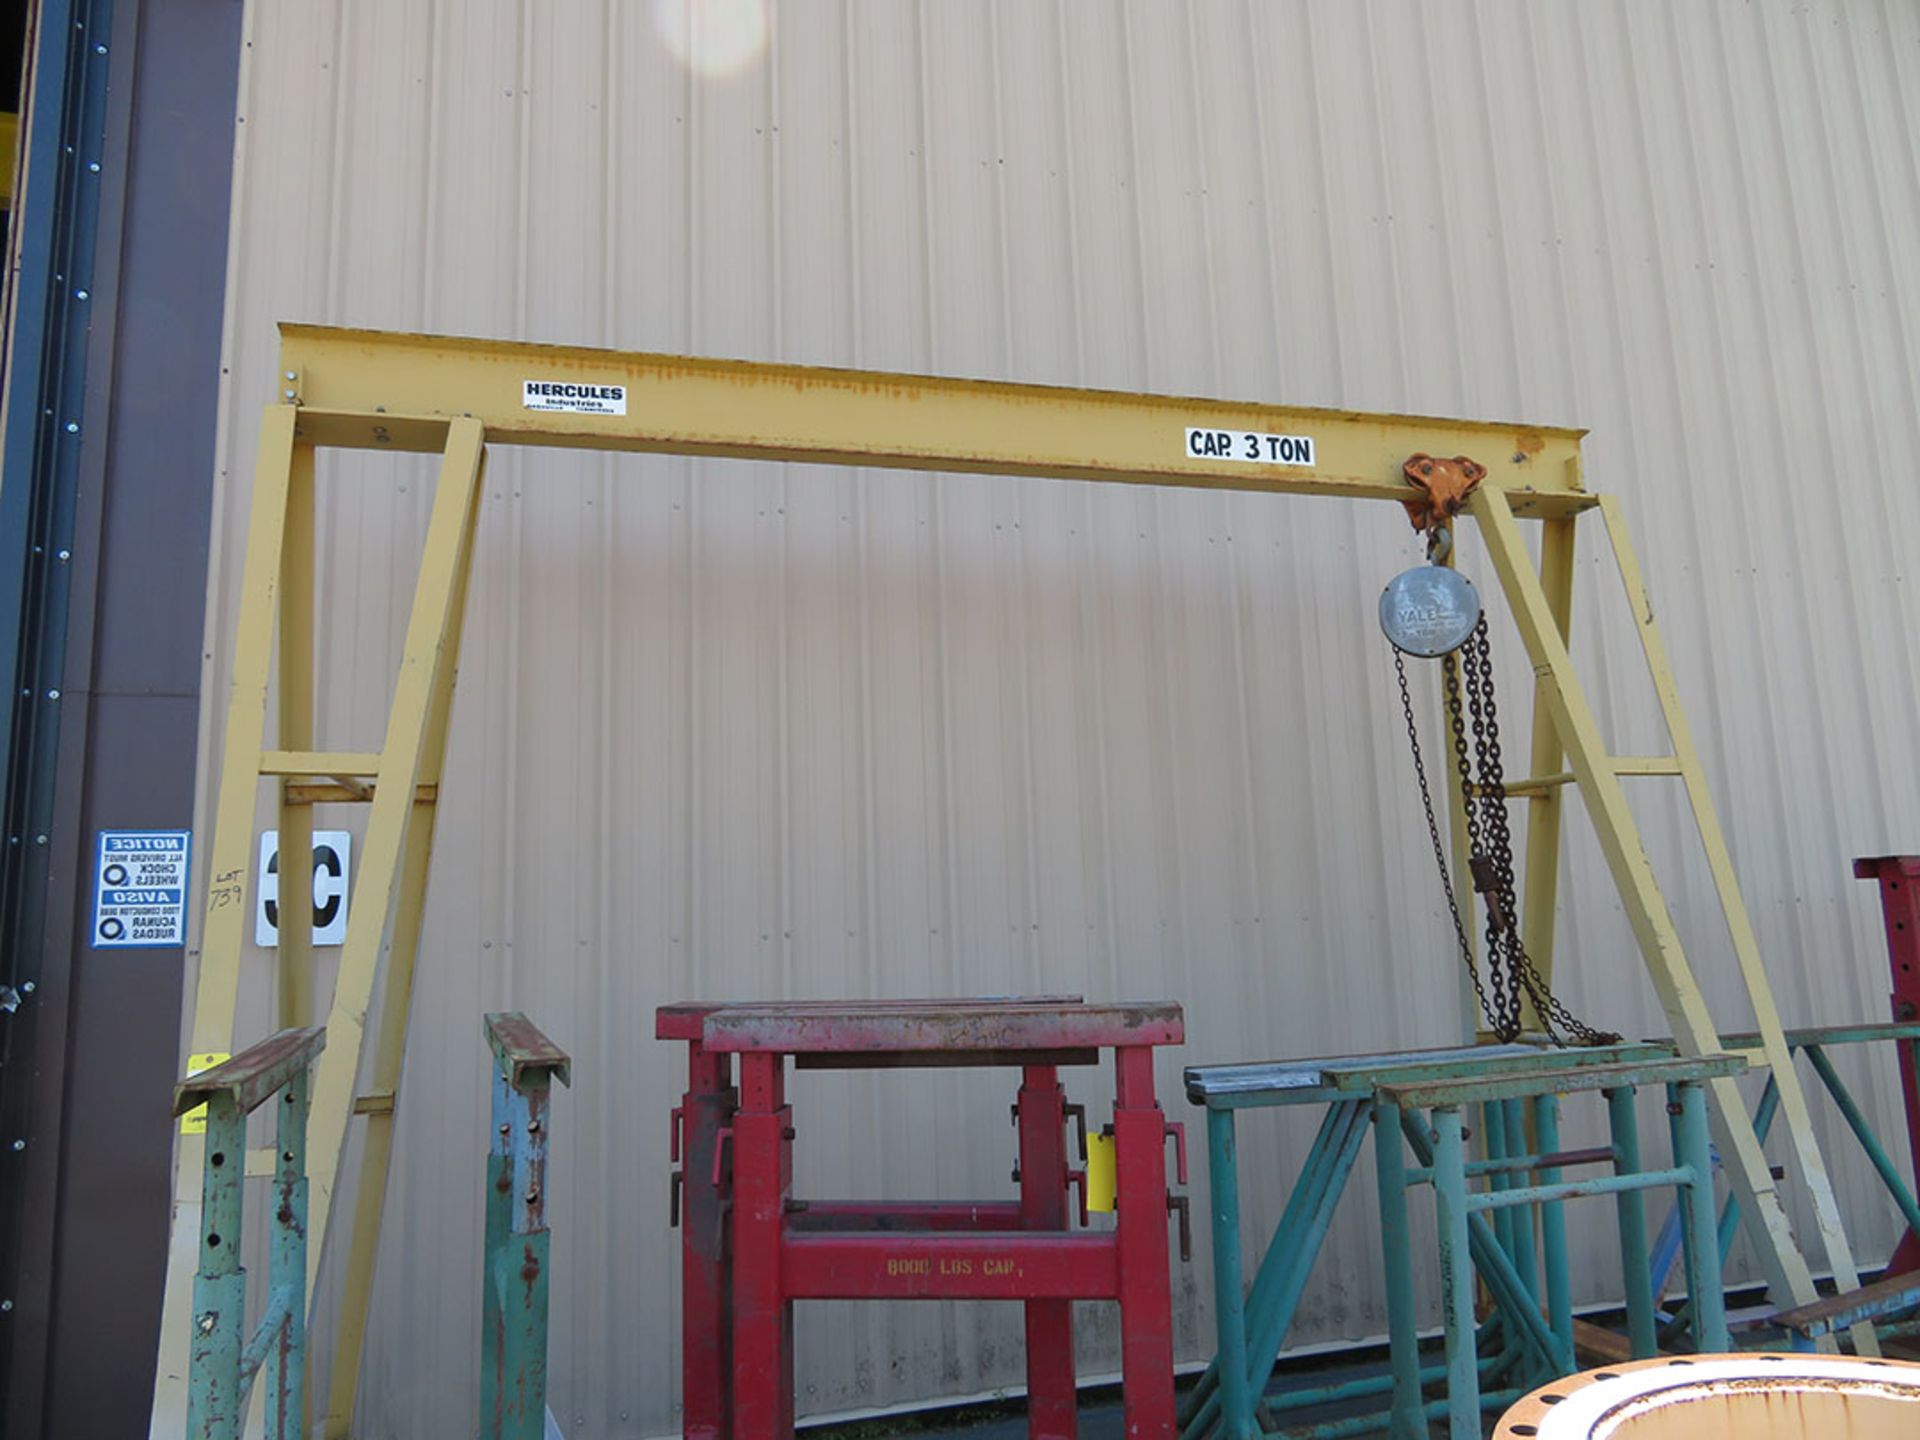 HERCULES 3 TON ROLLING GANTRY, WITH YALE 2 TON CHAIN HOIST